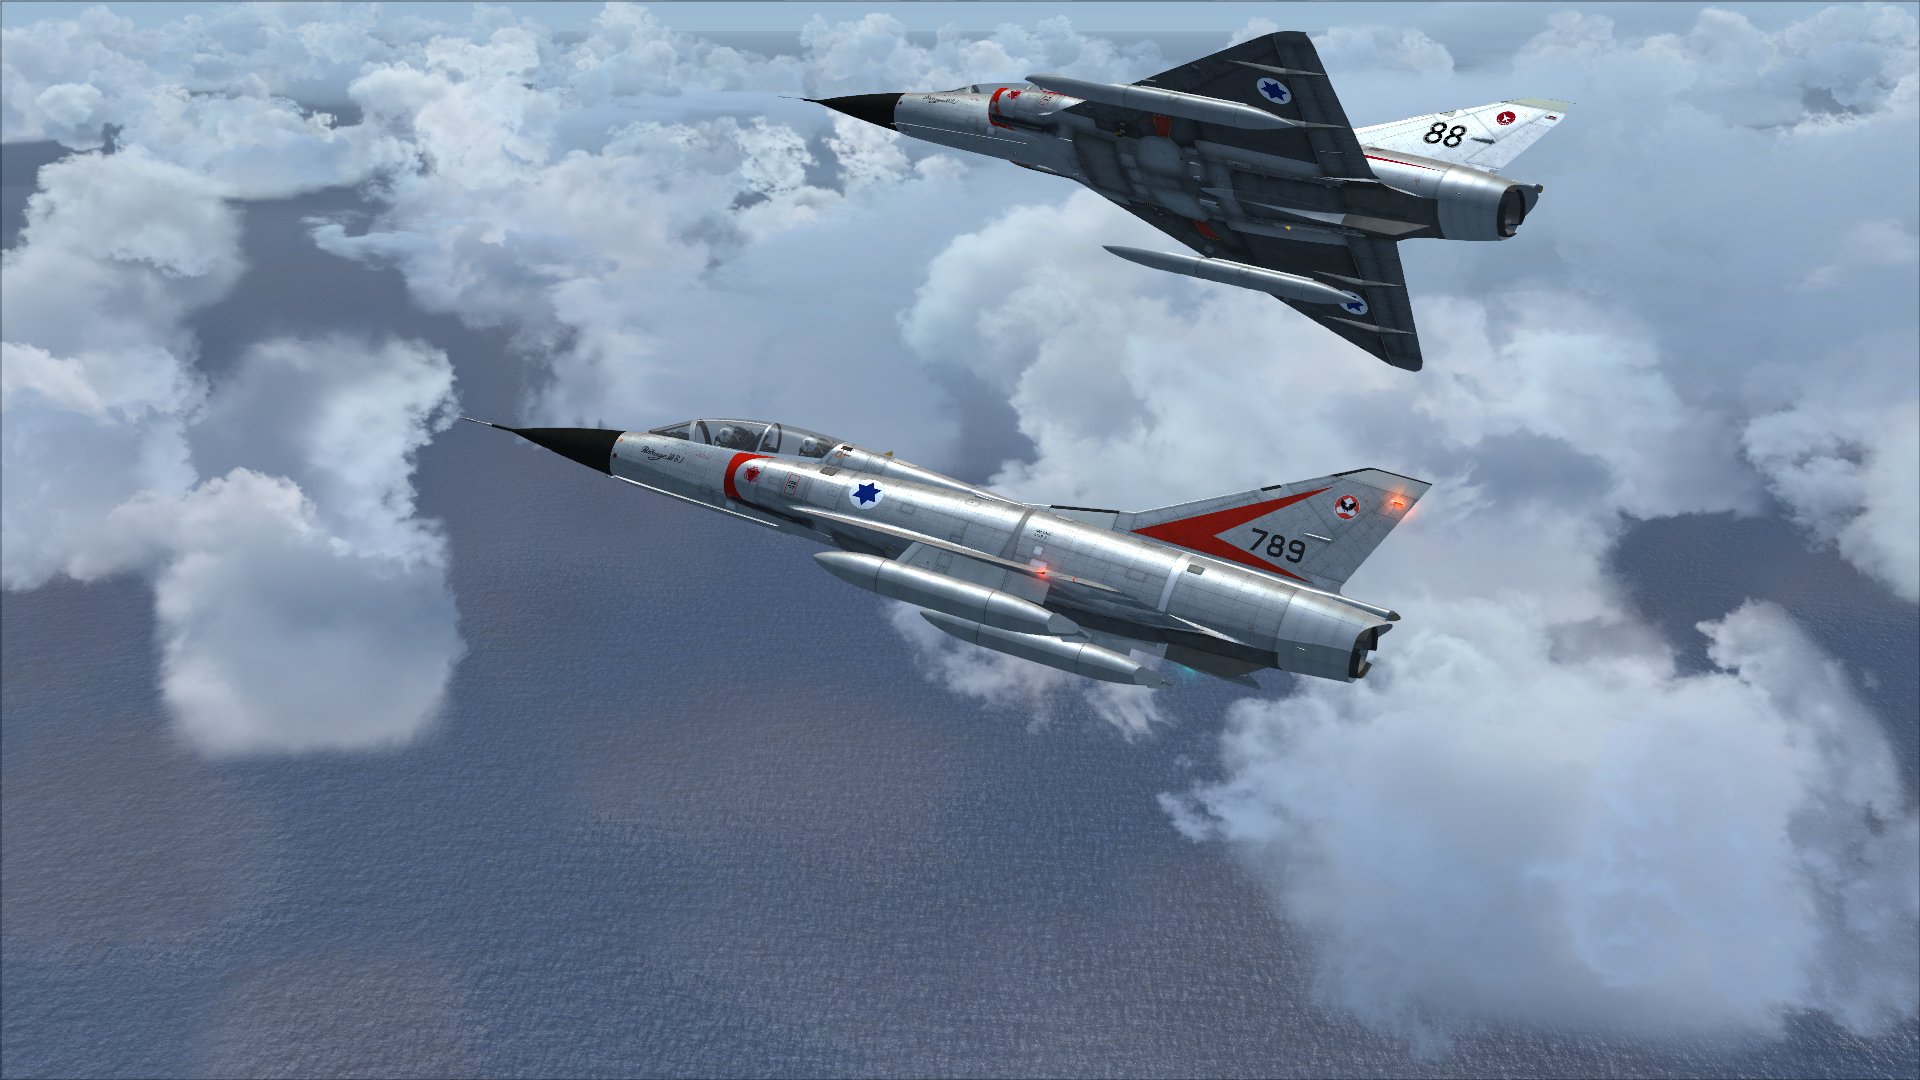 aircraft, Army, Attack, Dassault, Fighter, French, Jet, Military, Mirage iii Wallpaper